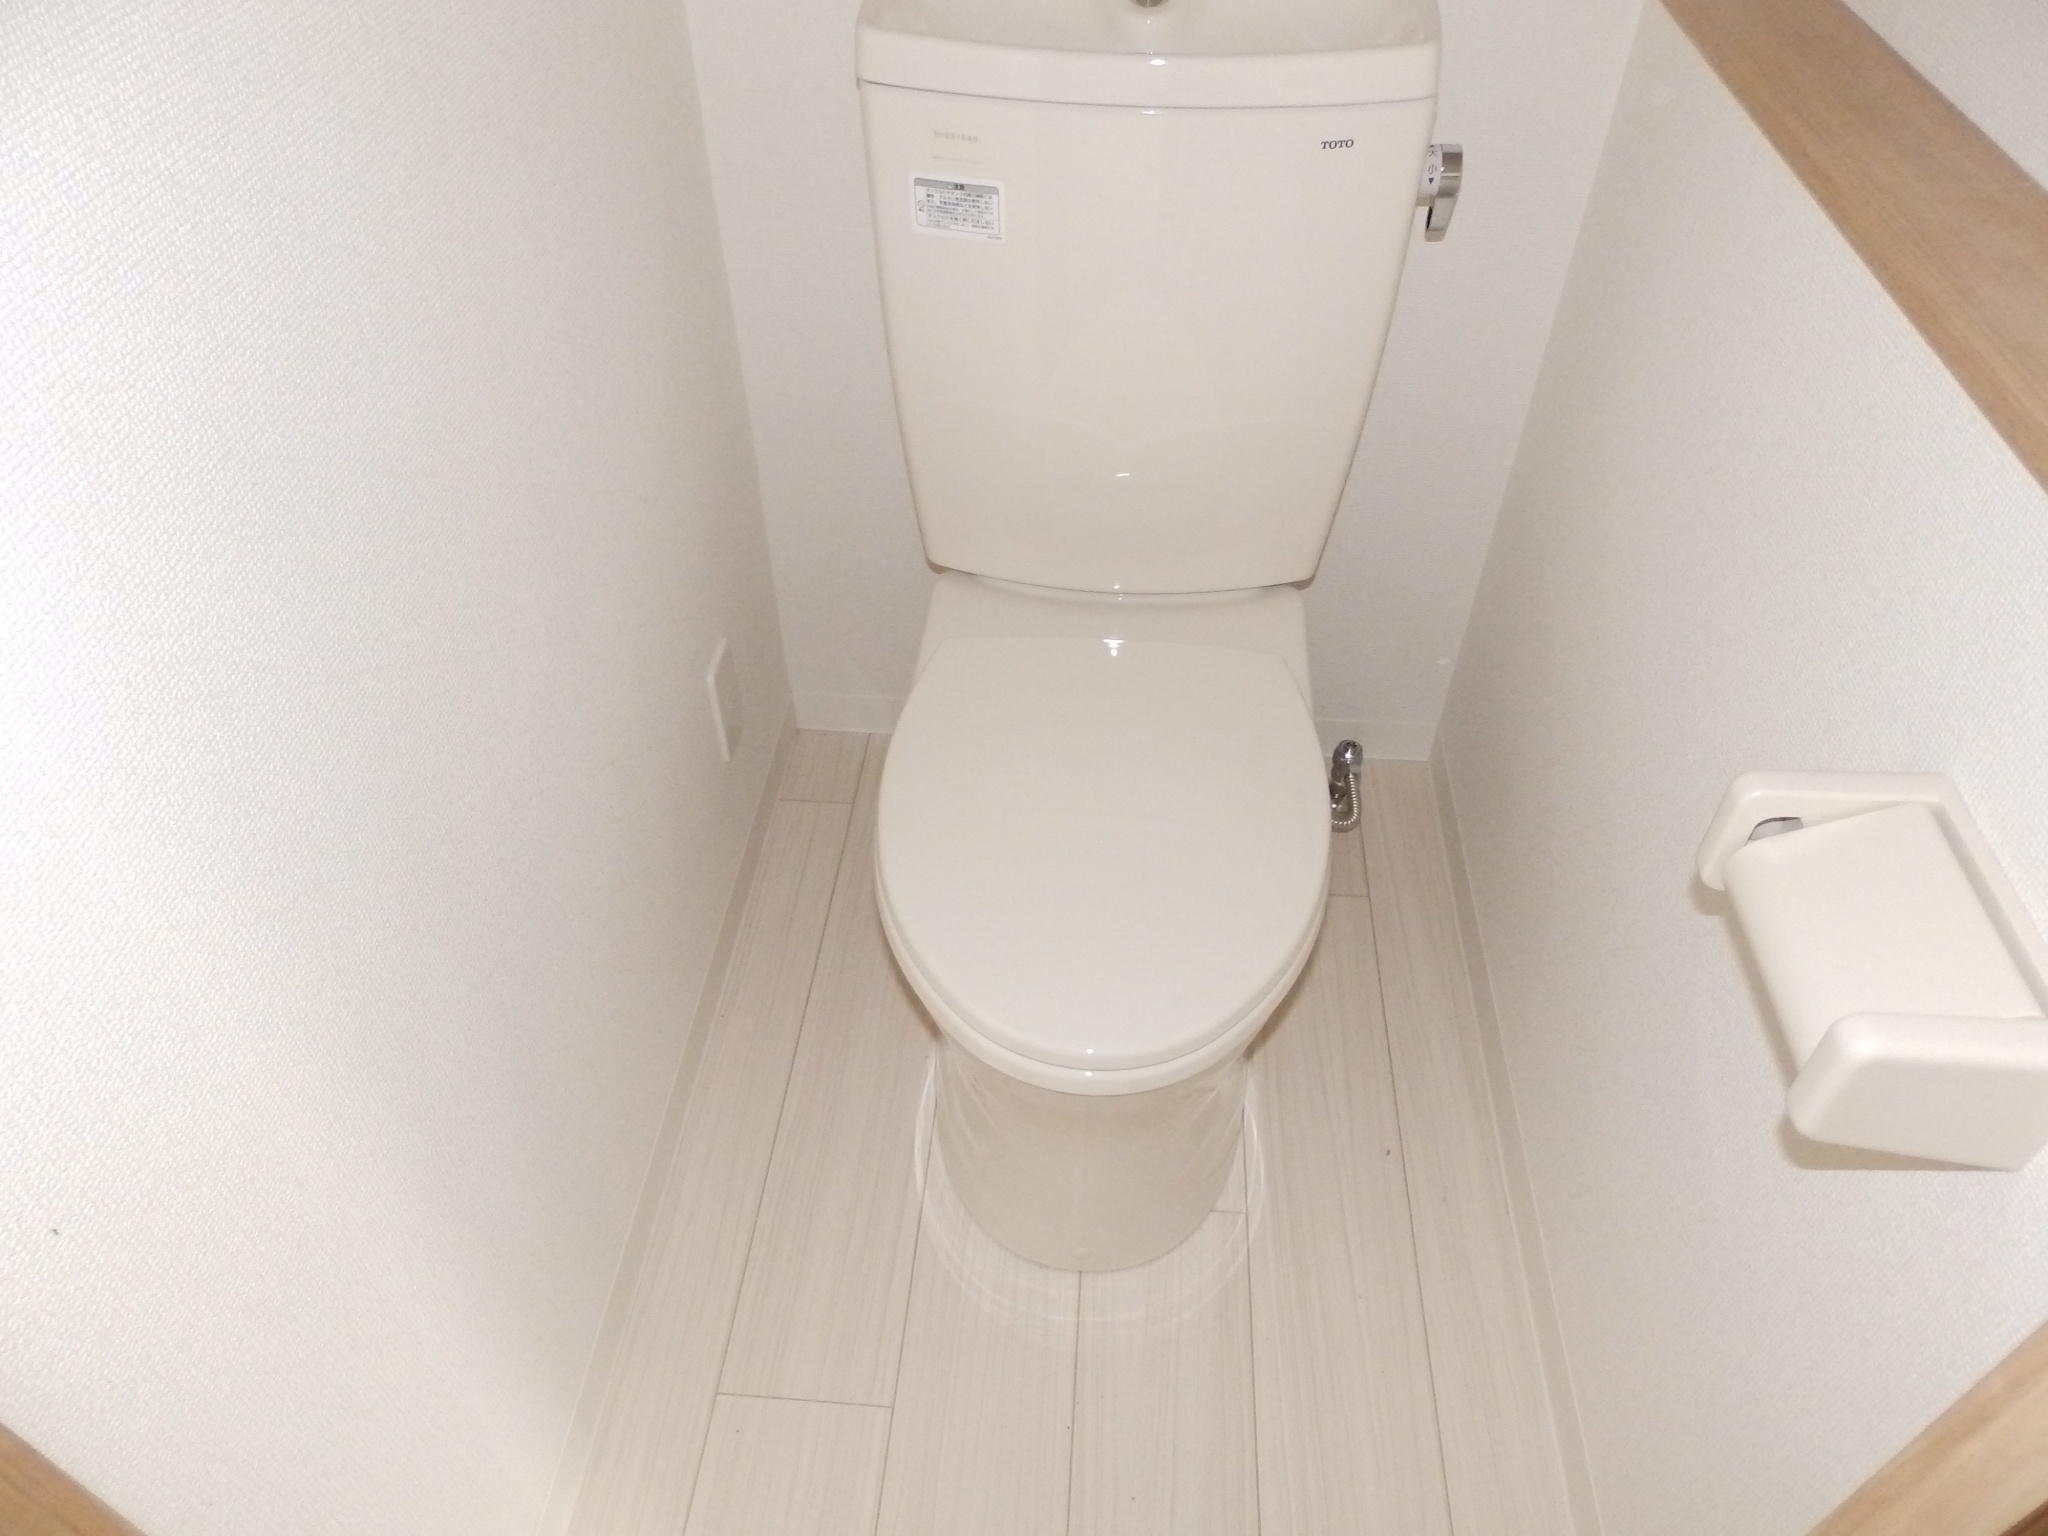 Toilet. It is a new article